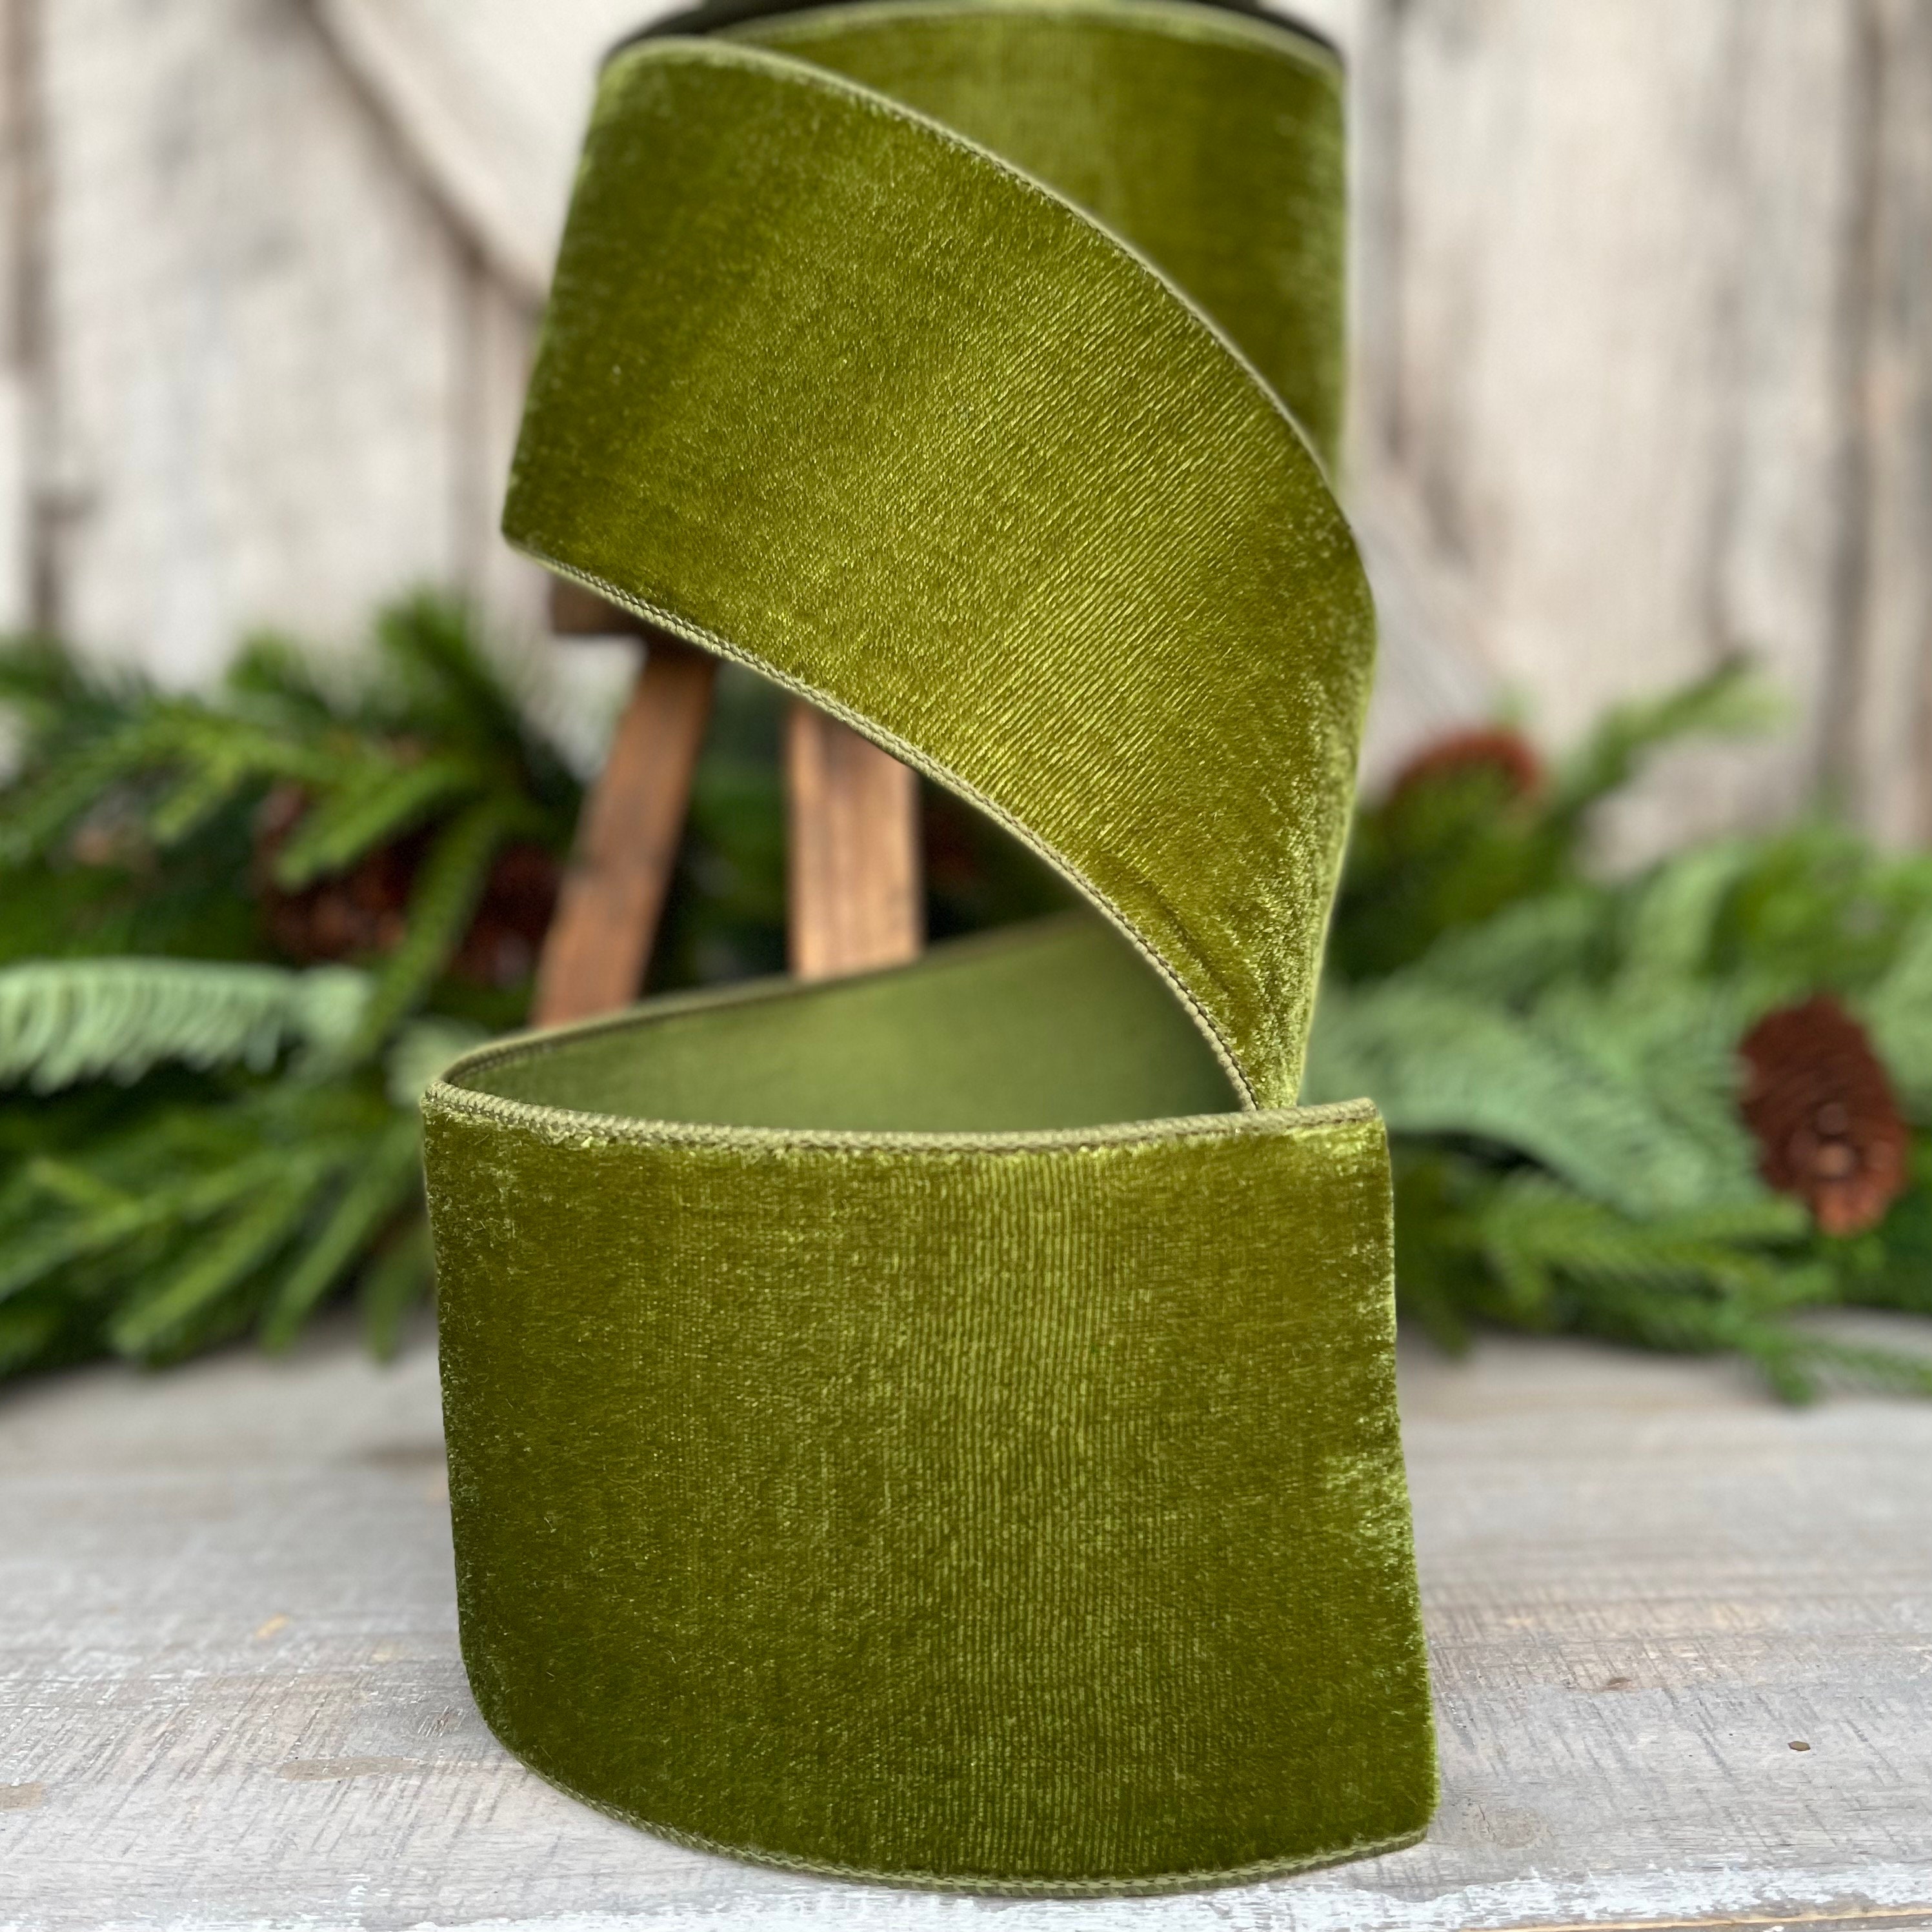  Green Ribbon for Gift Wrapping 3/8 Inch 25 Yds Forest